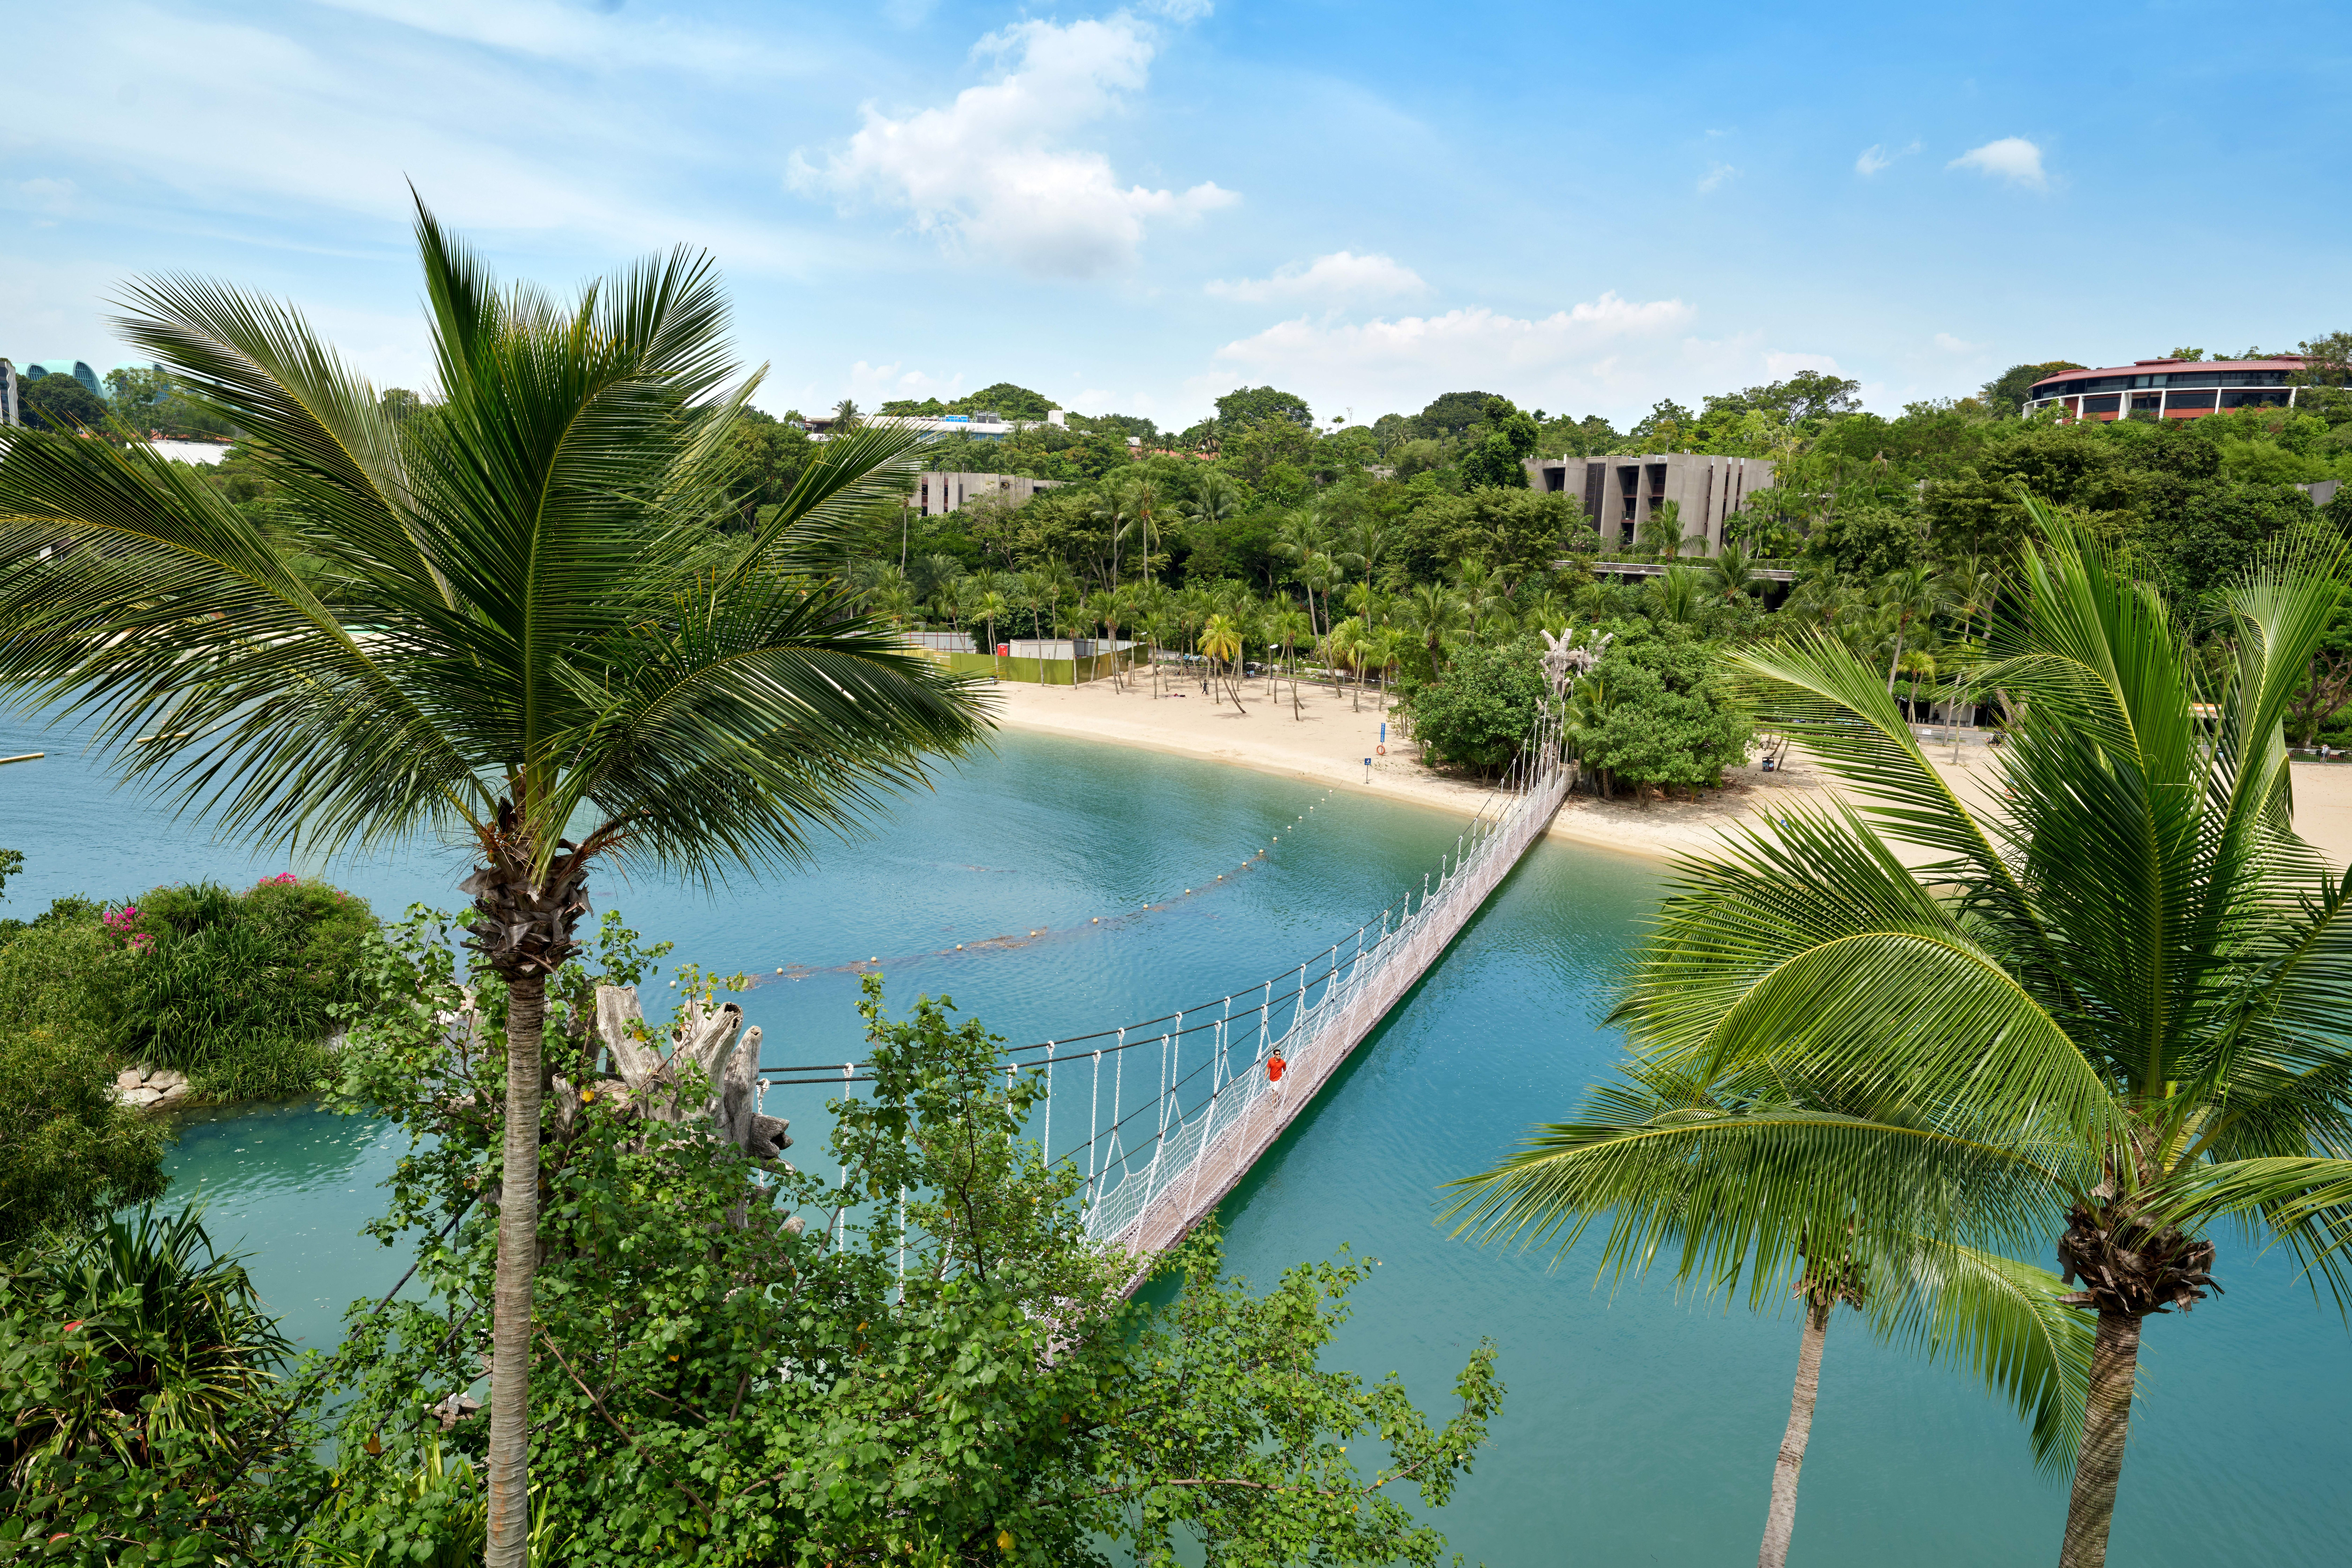 For a beautiful beach break, Sentosa Island’s palm-lined white sands are hard to beat